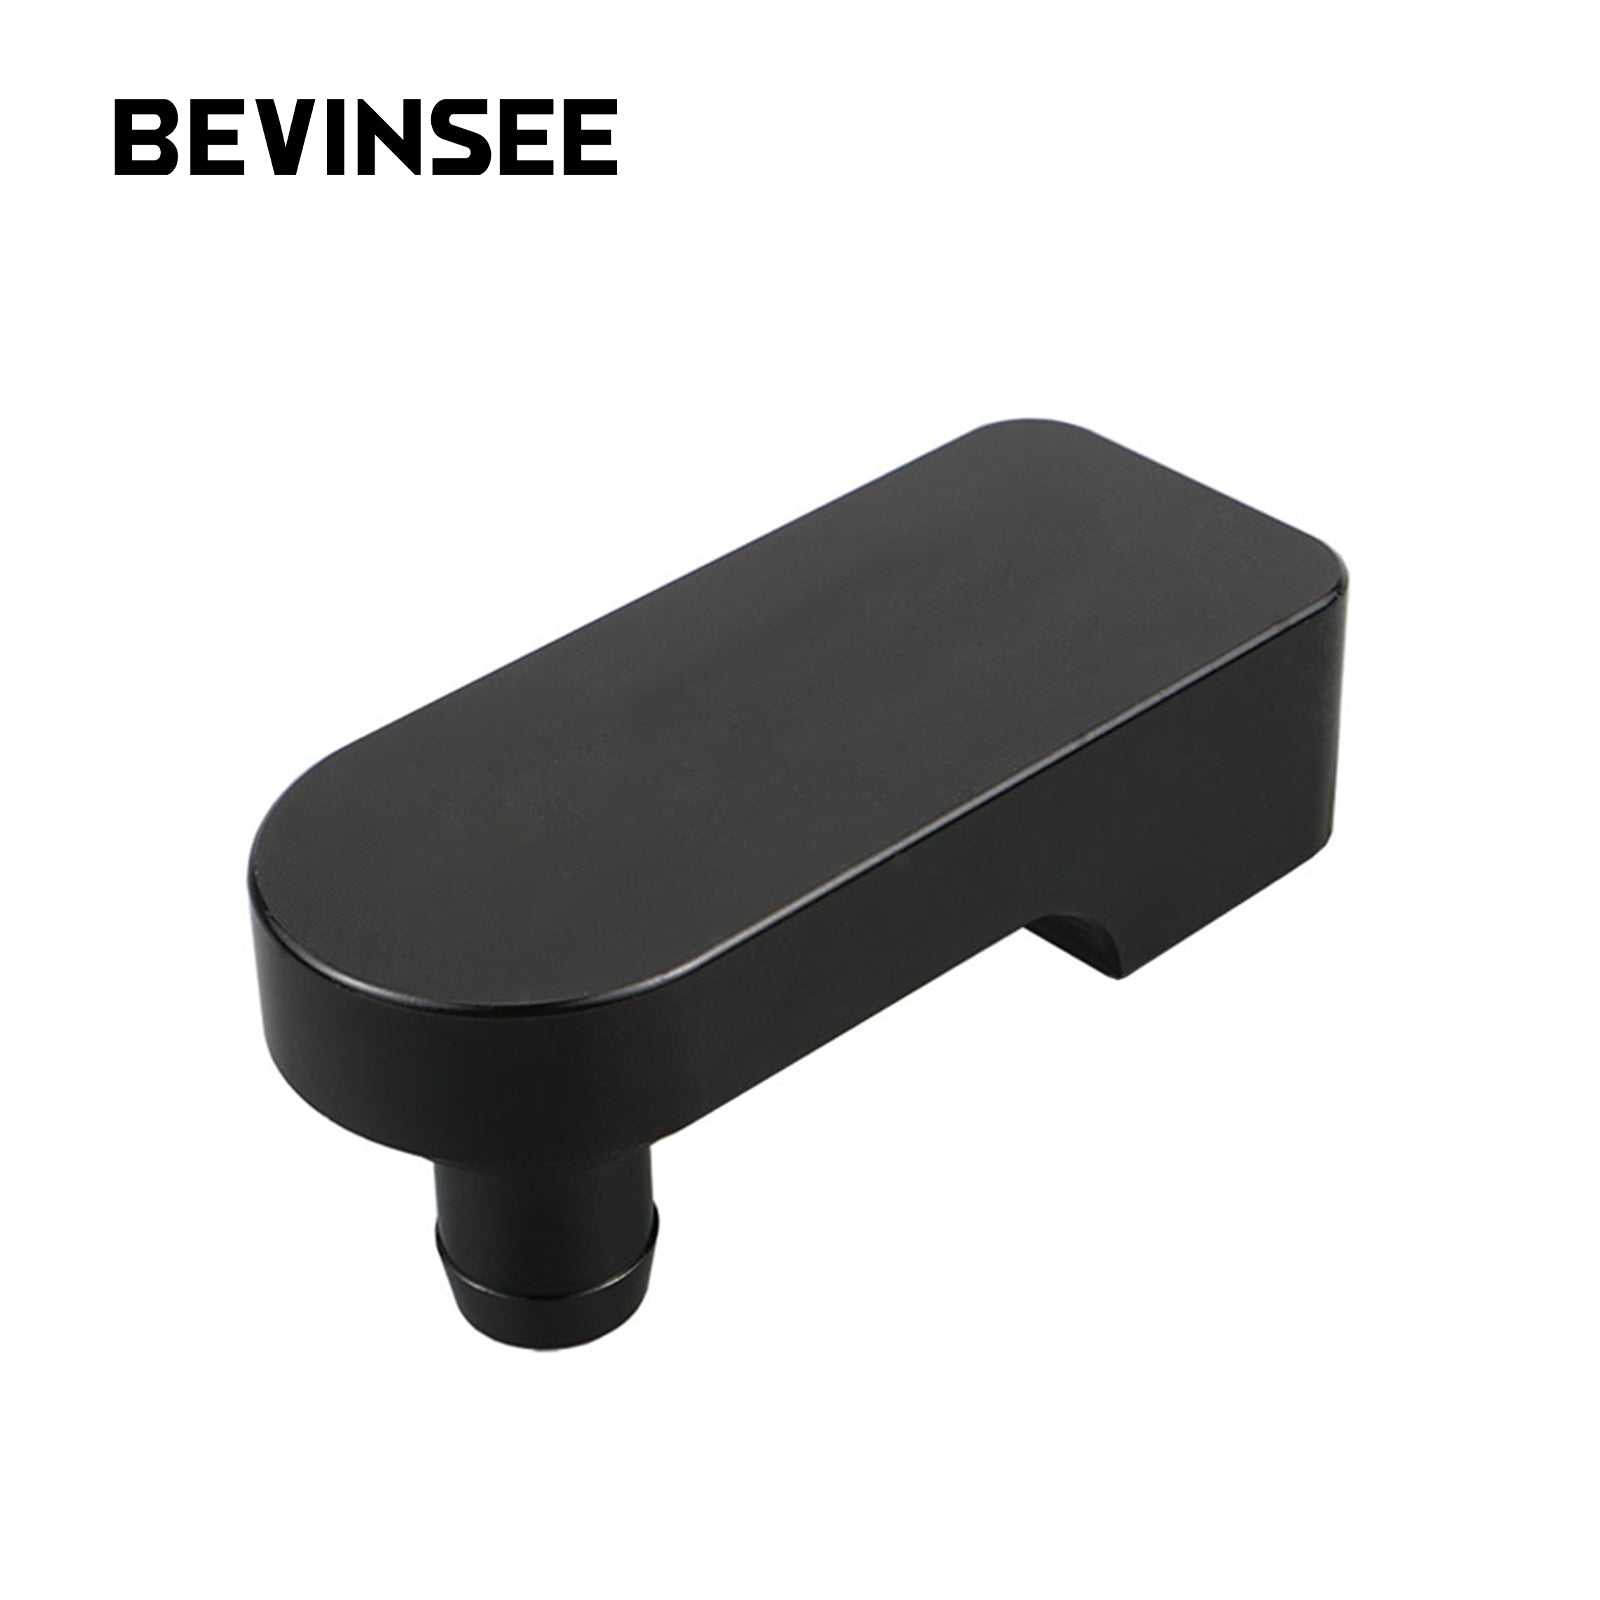 BEVINSEE PCV Valve Extension Adapter for H22A4 H23A F20B H22 EG DC2 for Honda